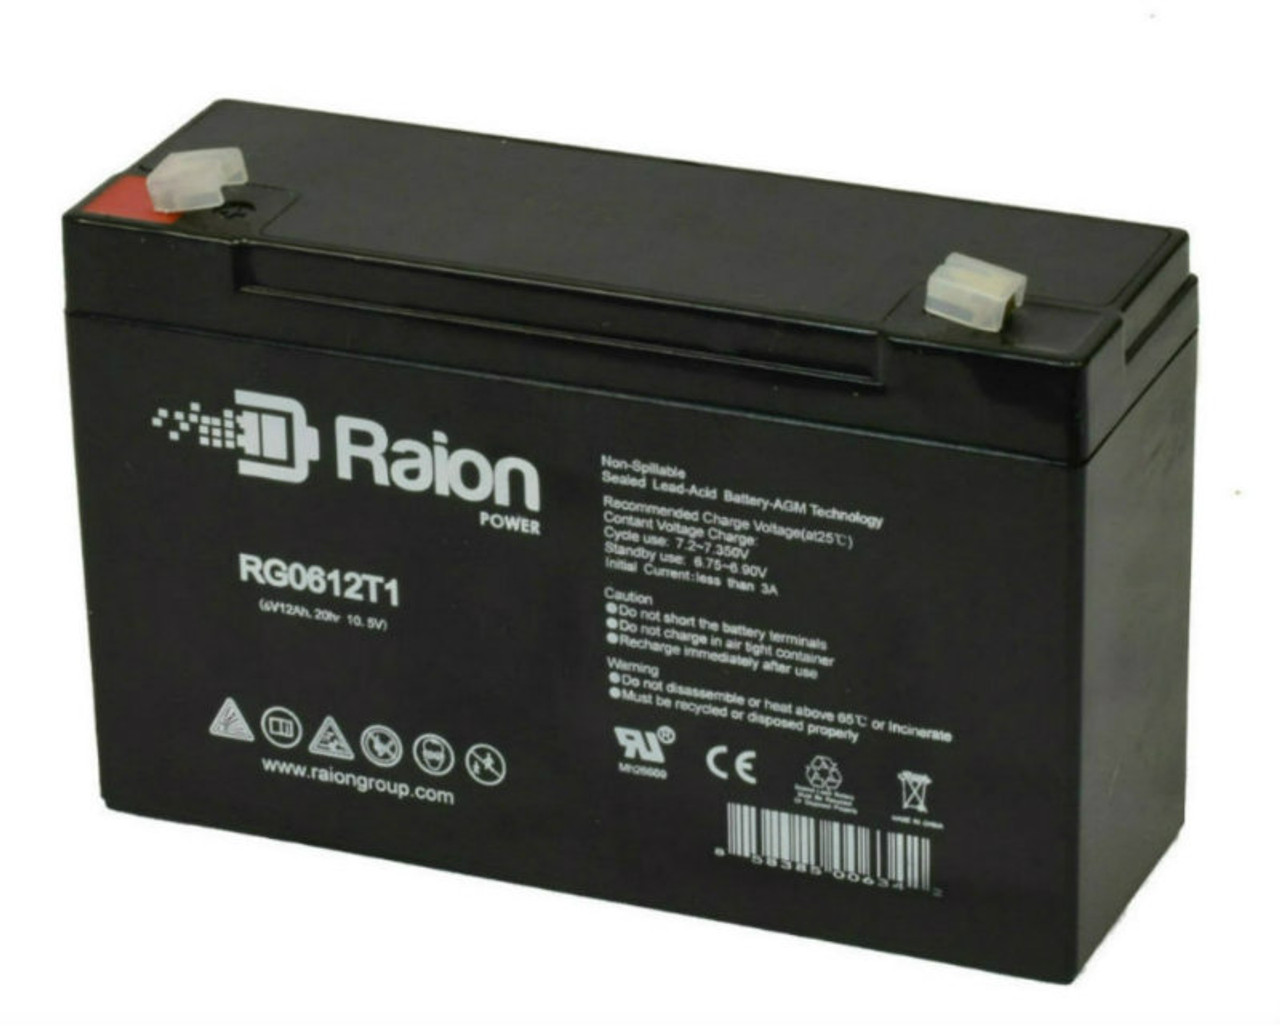 Raion Power RG06120T1 Replacement Battery for Union Battery MX-06100